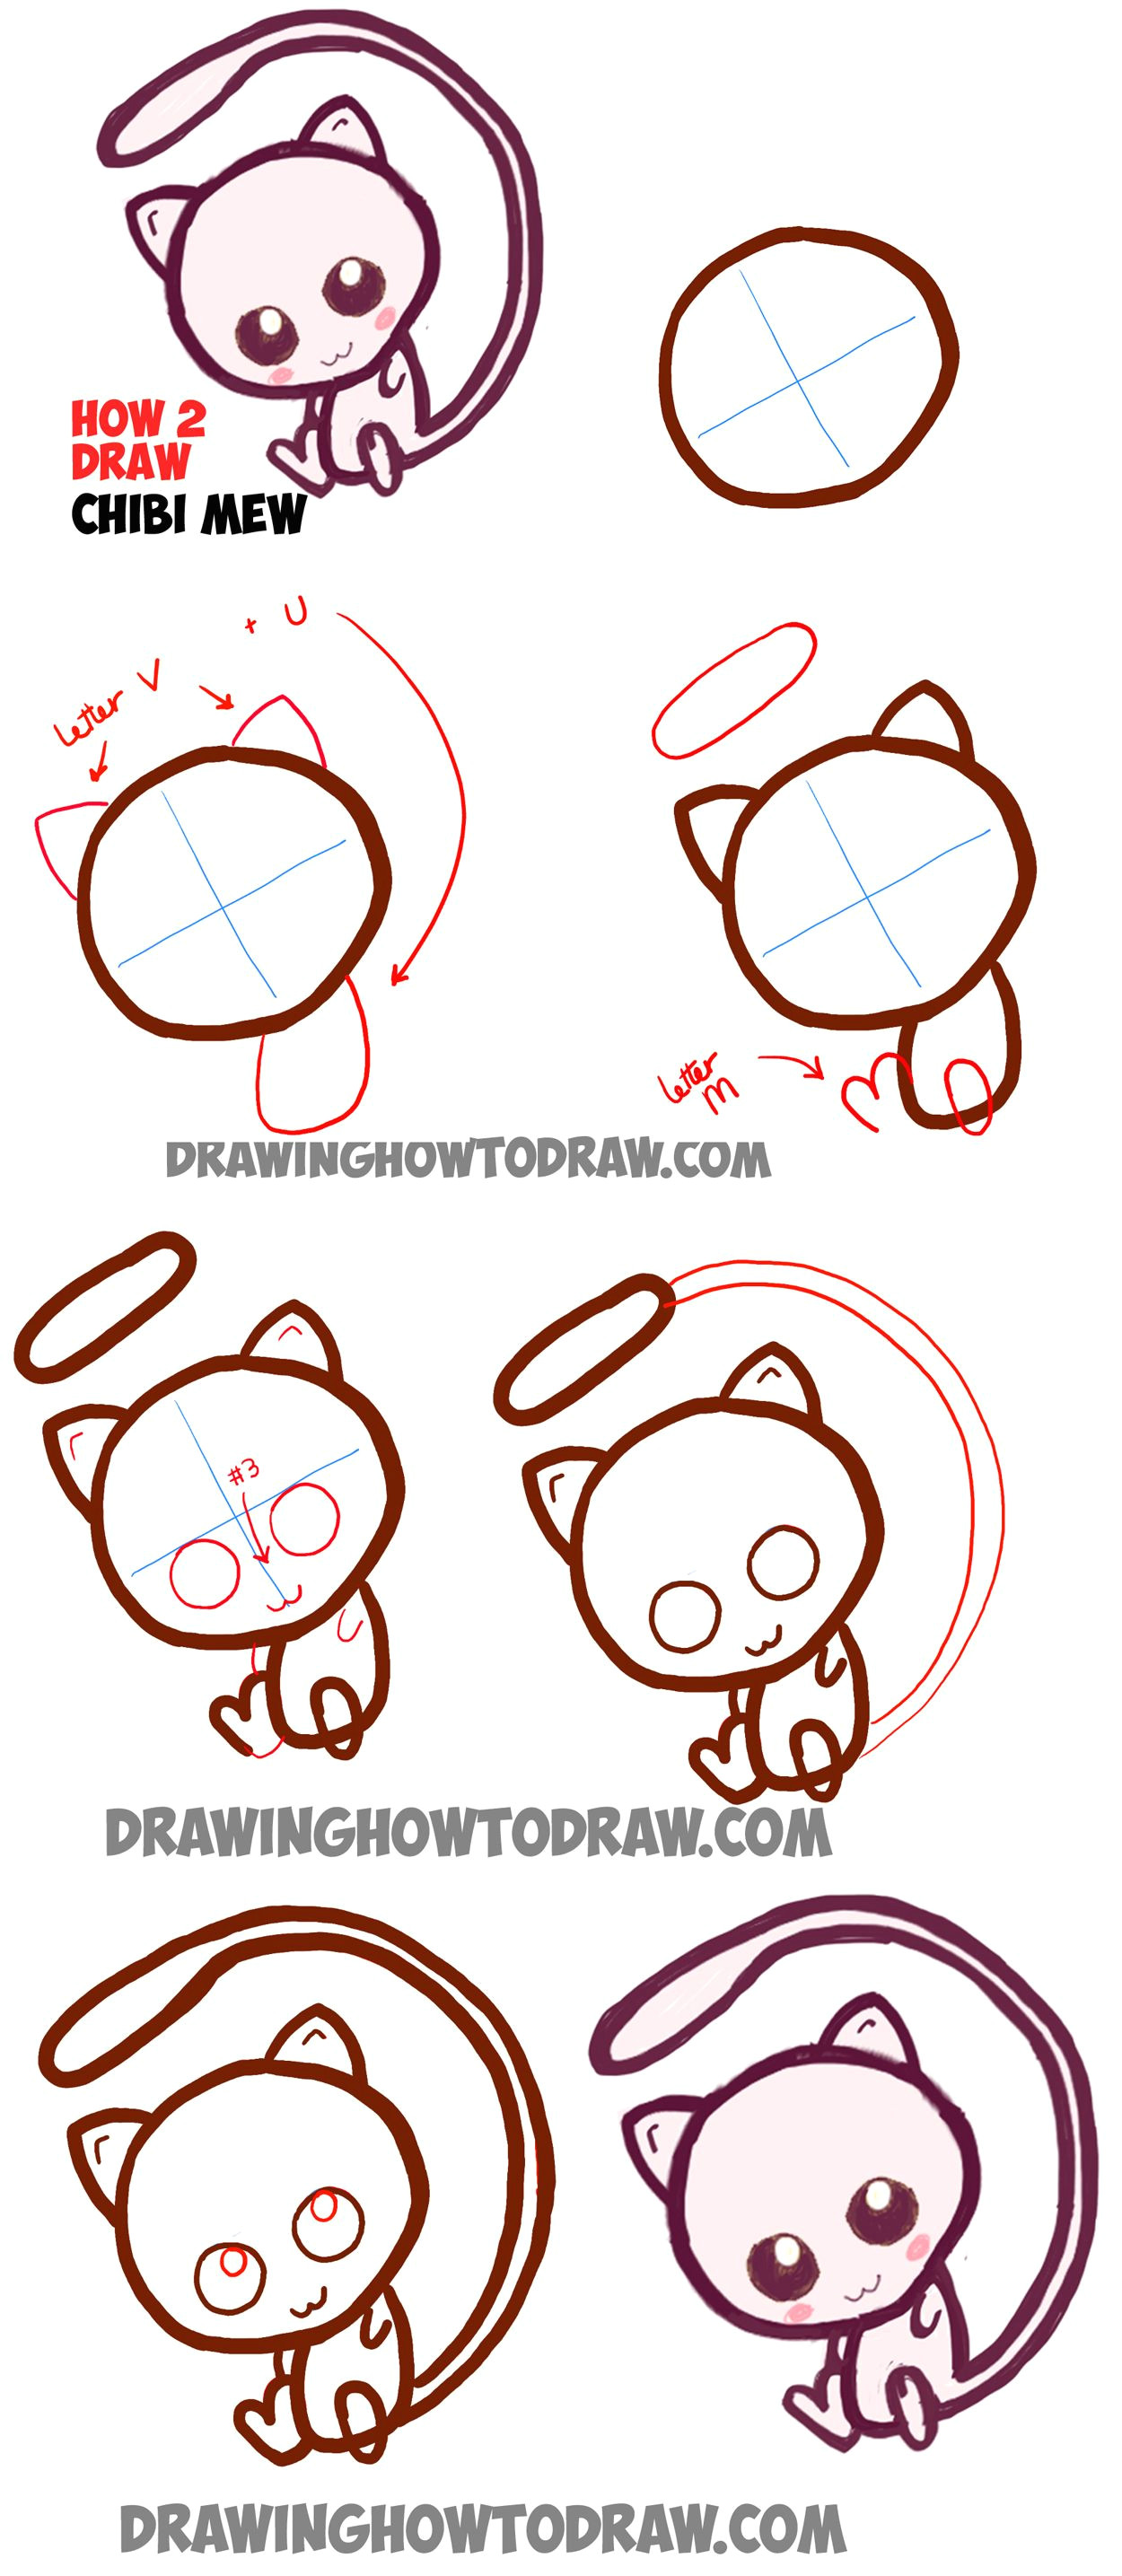 V Drawing Easy How to Draw Cute Baby Chibi Mew From Pokemon Easy Step by Step